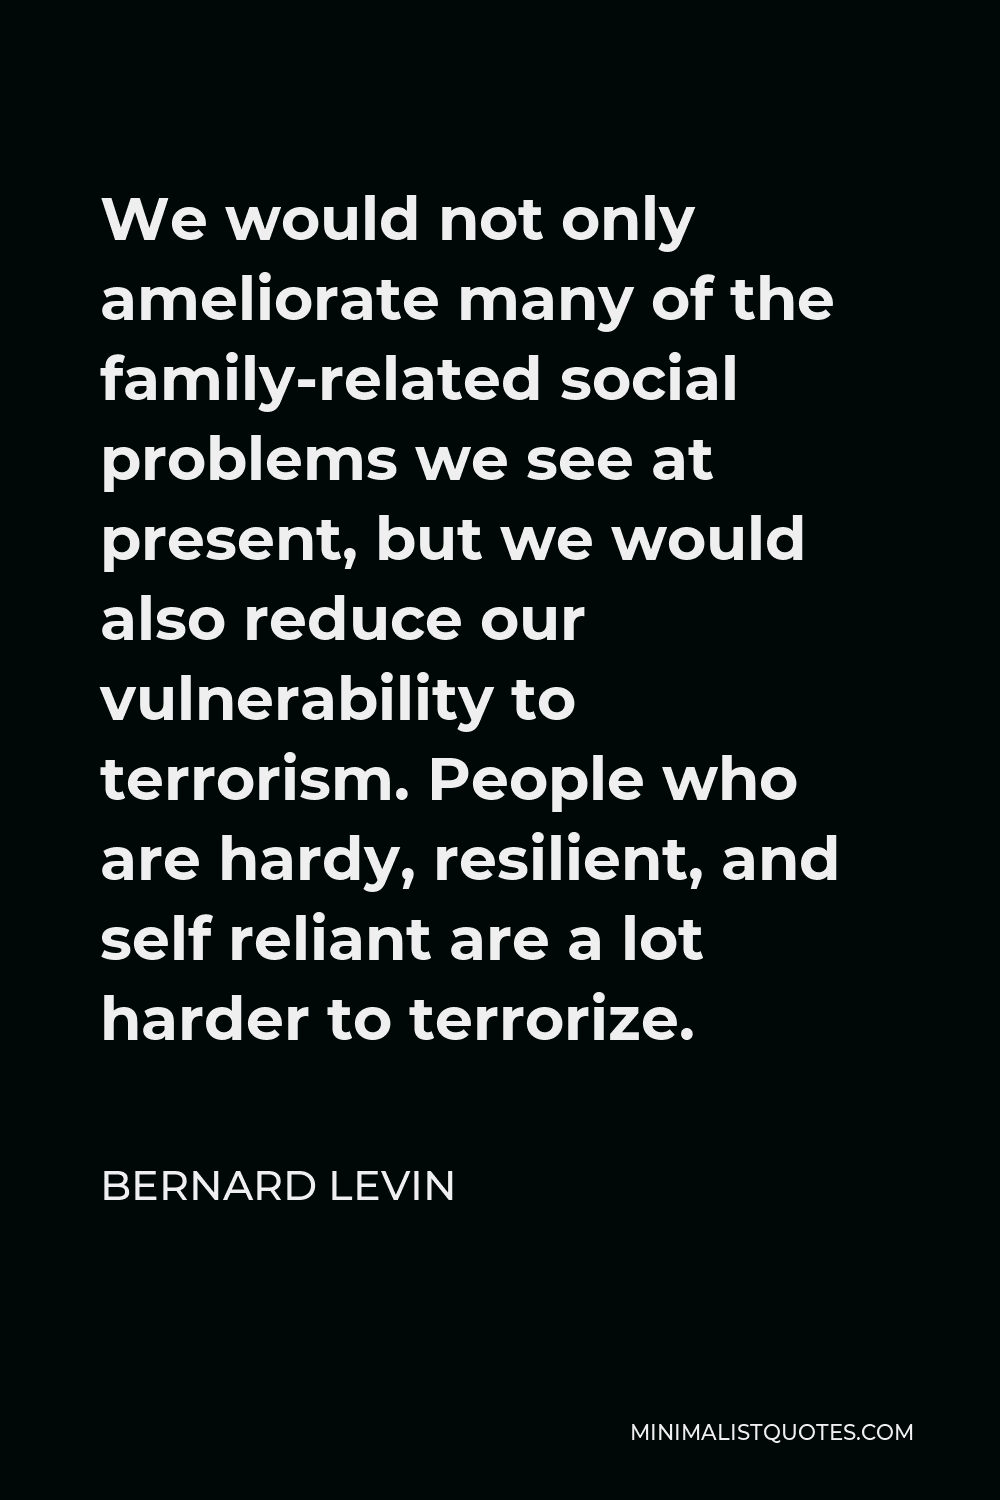 Bernard Levin Quote - We would not only ameliorate many of the family-related social problems we see at present, but we would also reduce our vulnerability to terrorism. People who are hardy, resilient, and self reliant are a lot harder to terrorize.